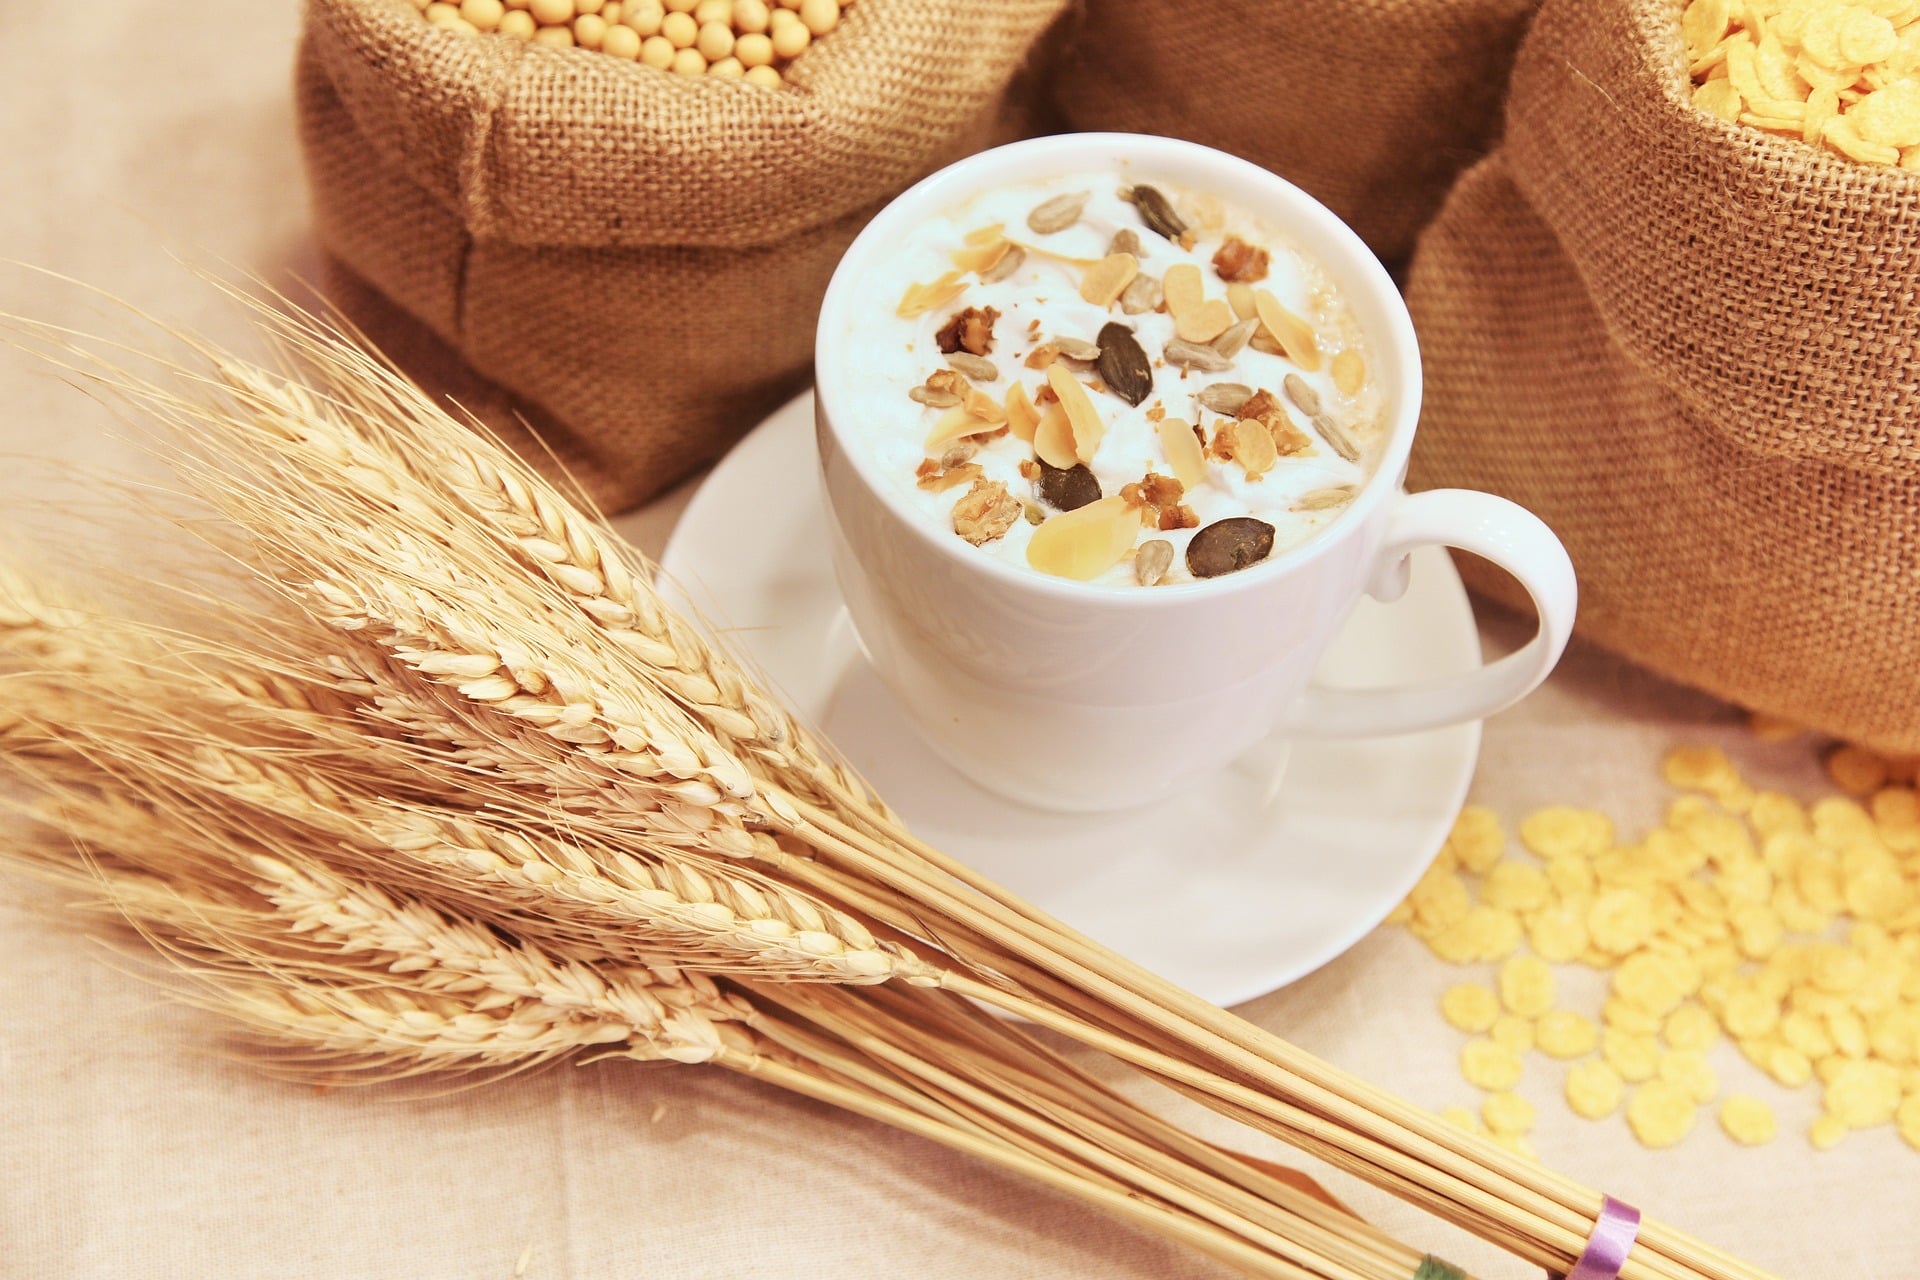 Cereal crops in a cup